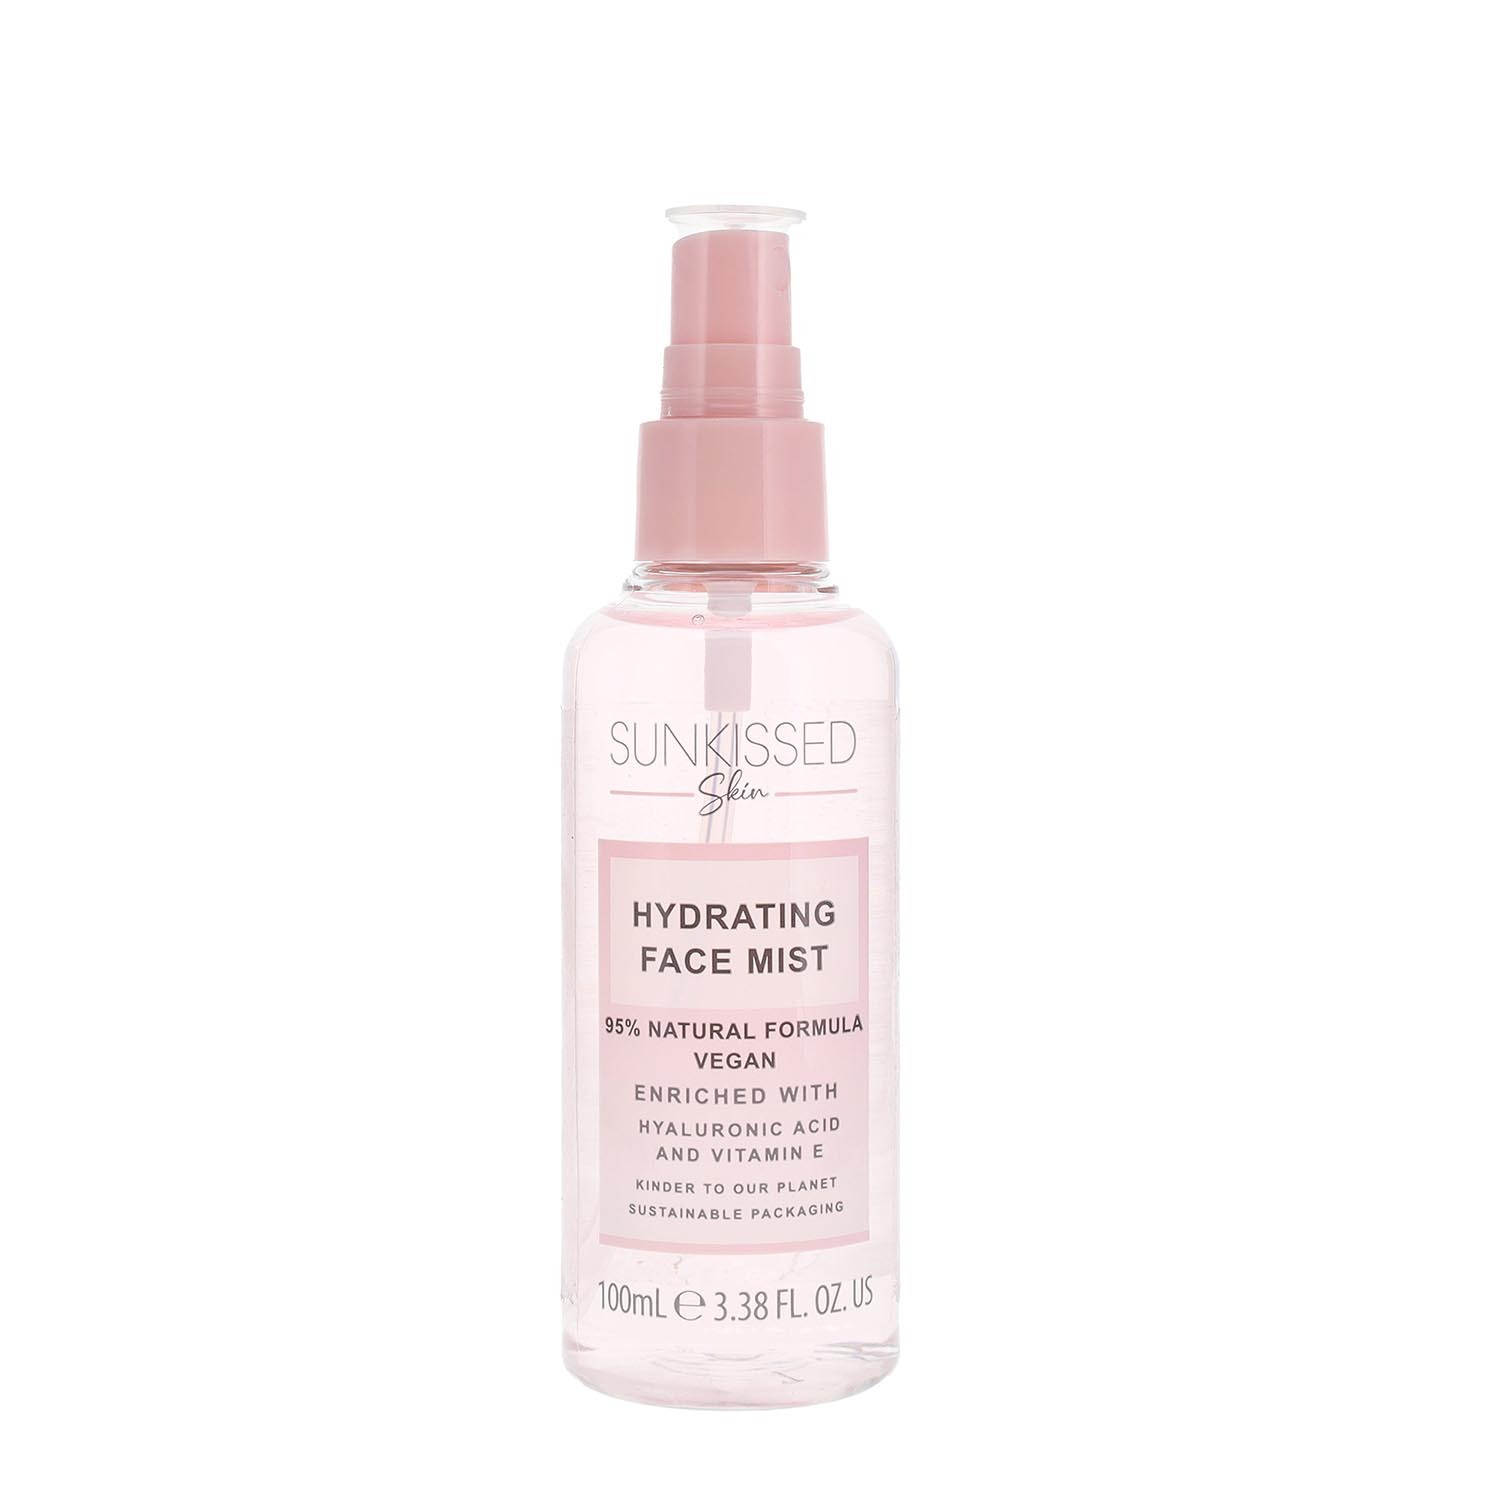 Sunkissed Hydrating Face Mist - Pink Image